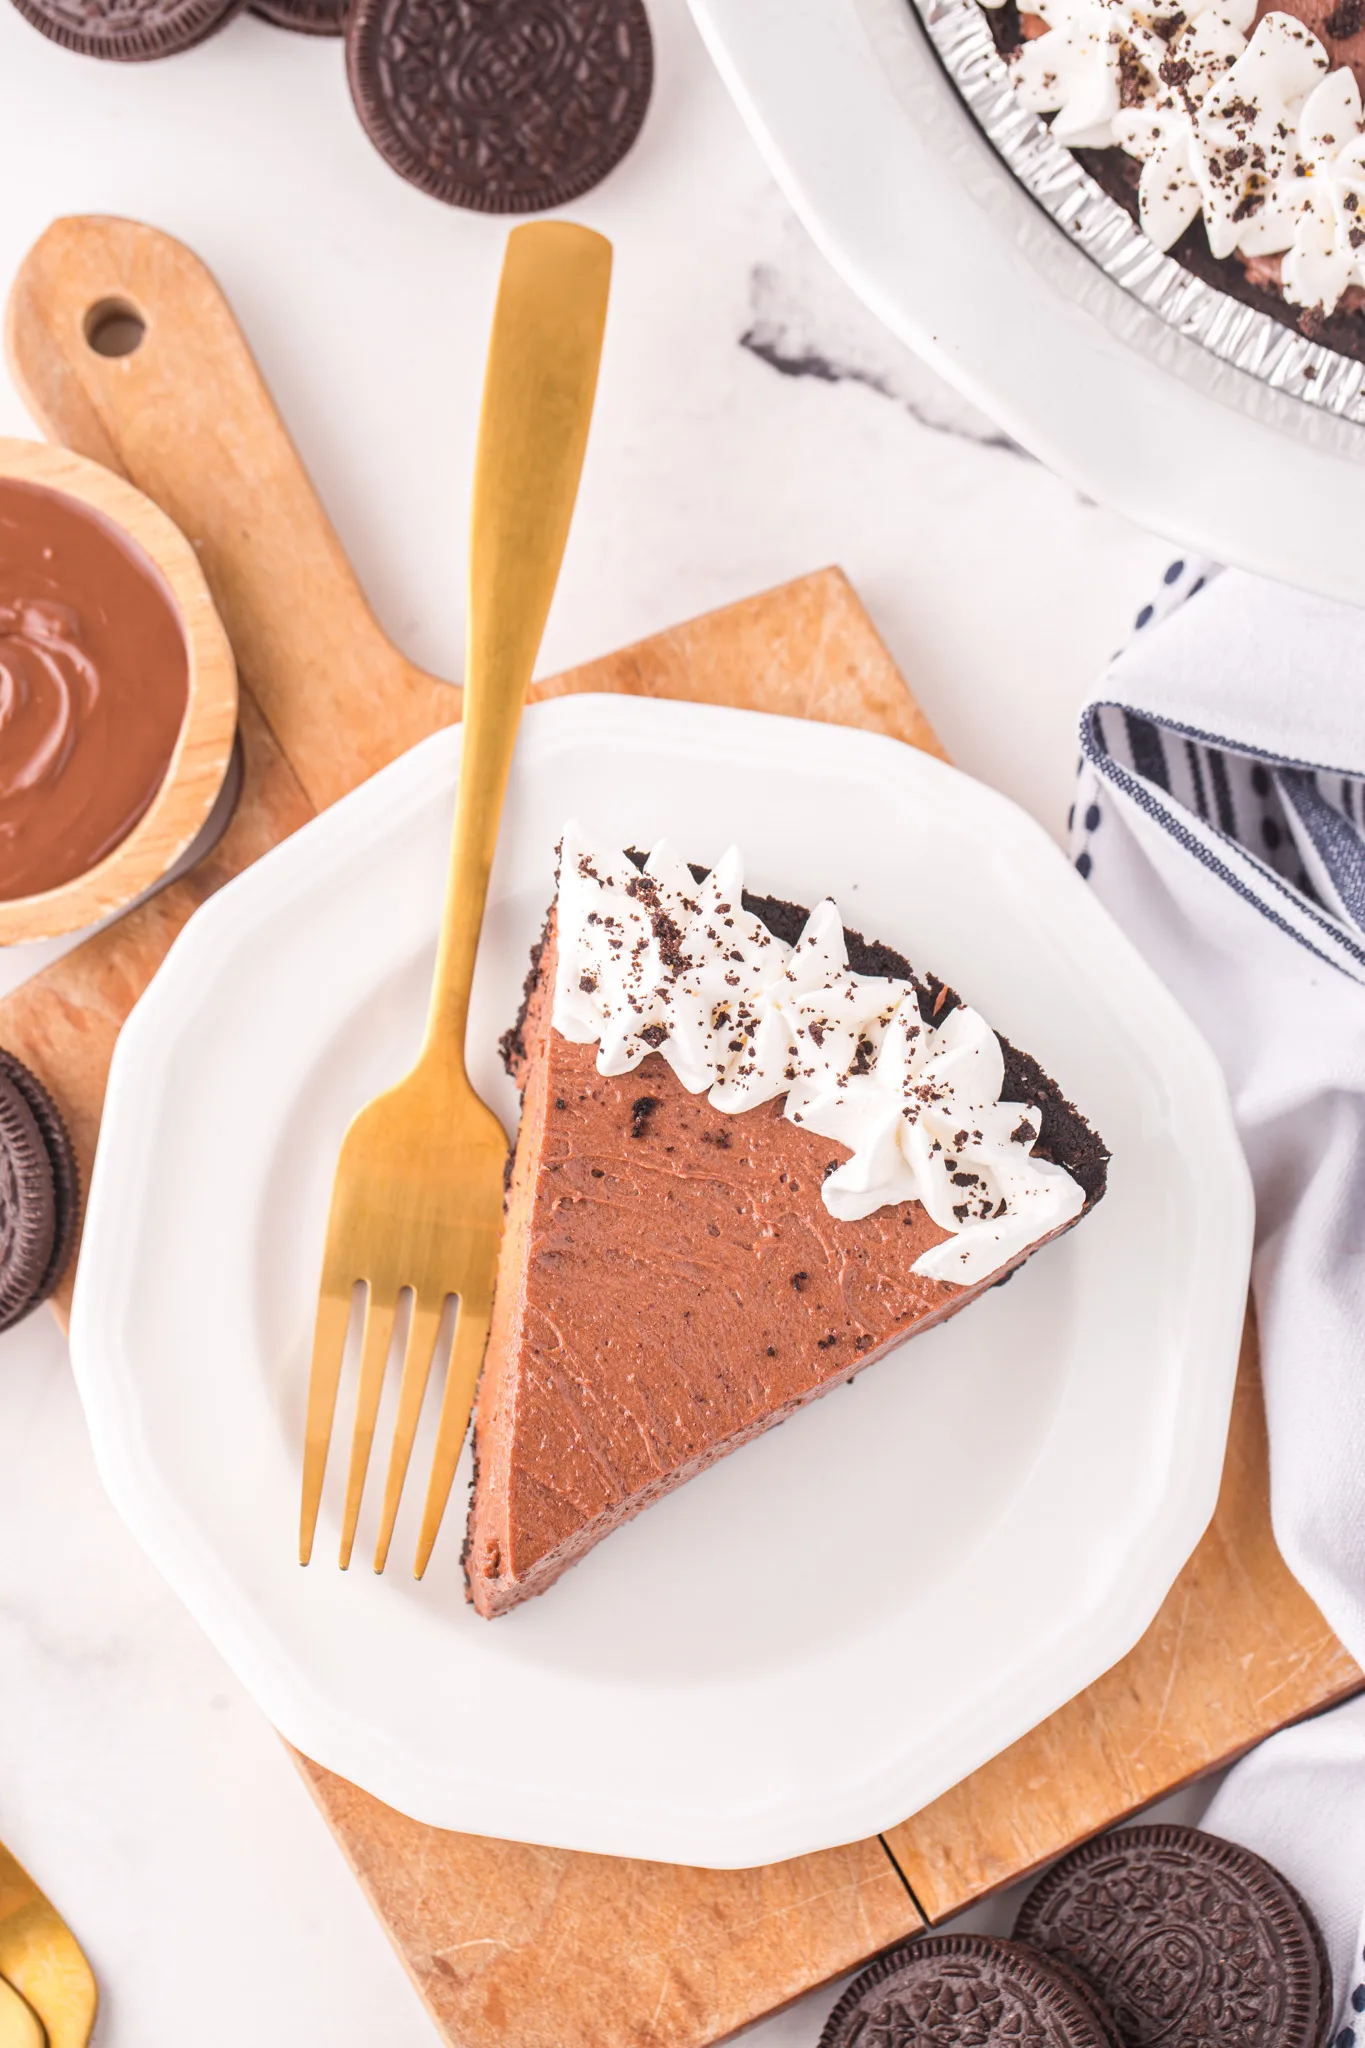 Nutella Pie is an easy no bake dessert recipe made with chocolate hazelnut spread, cream cheese, heavy cream and instant chocolate pudding mix all in a store bought Oreo crust.